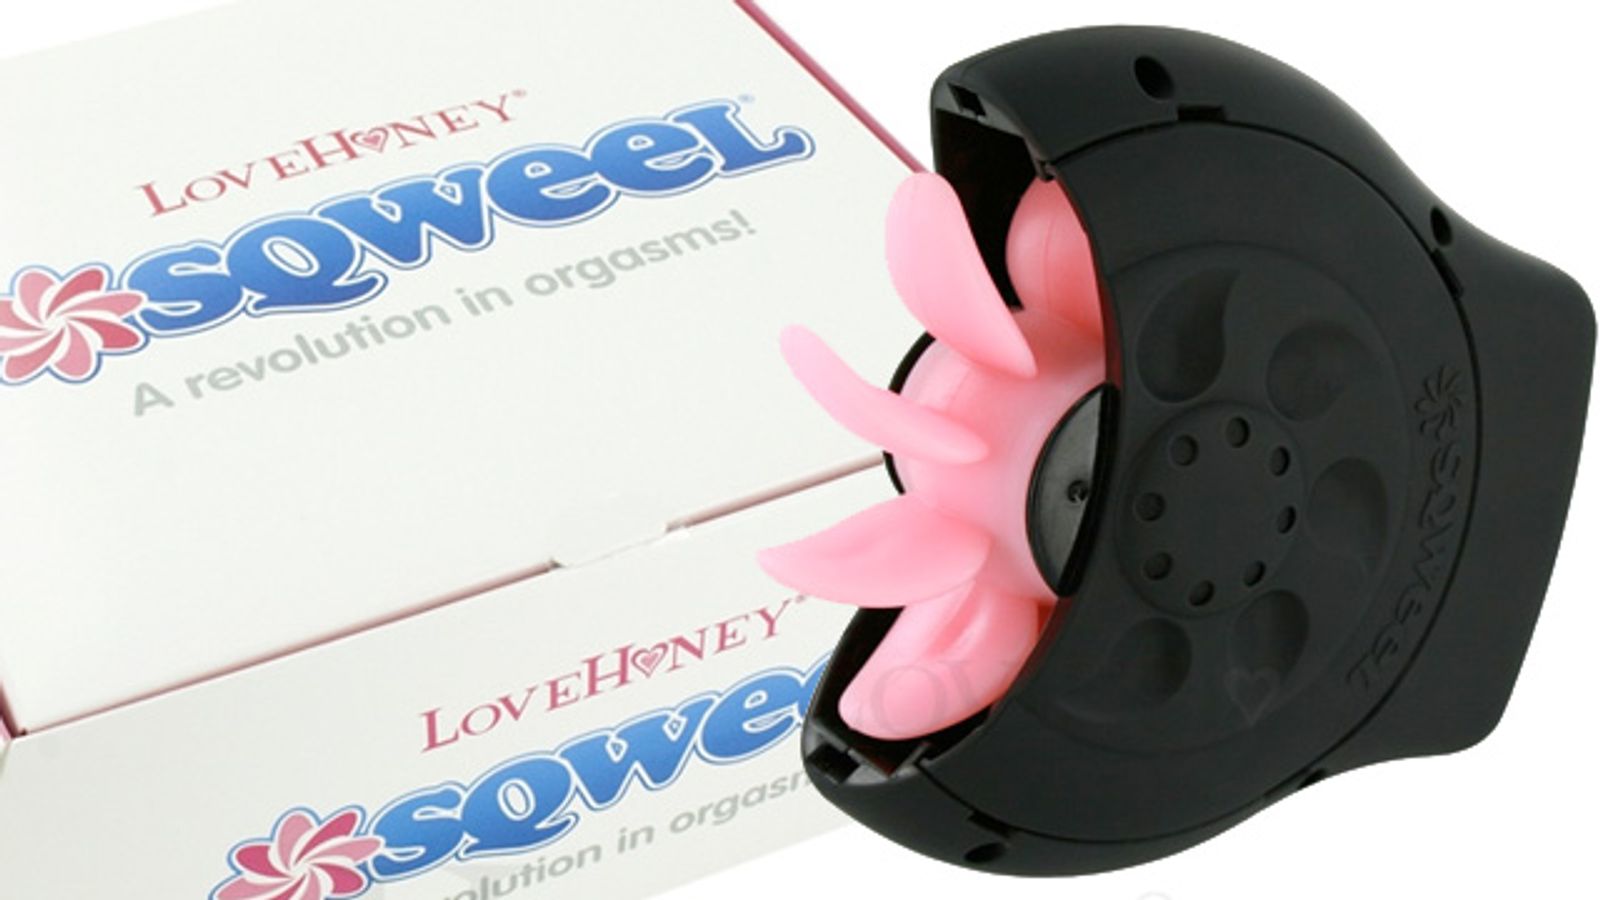 New Sqweel Available from Nalpac Ltd.